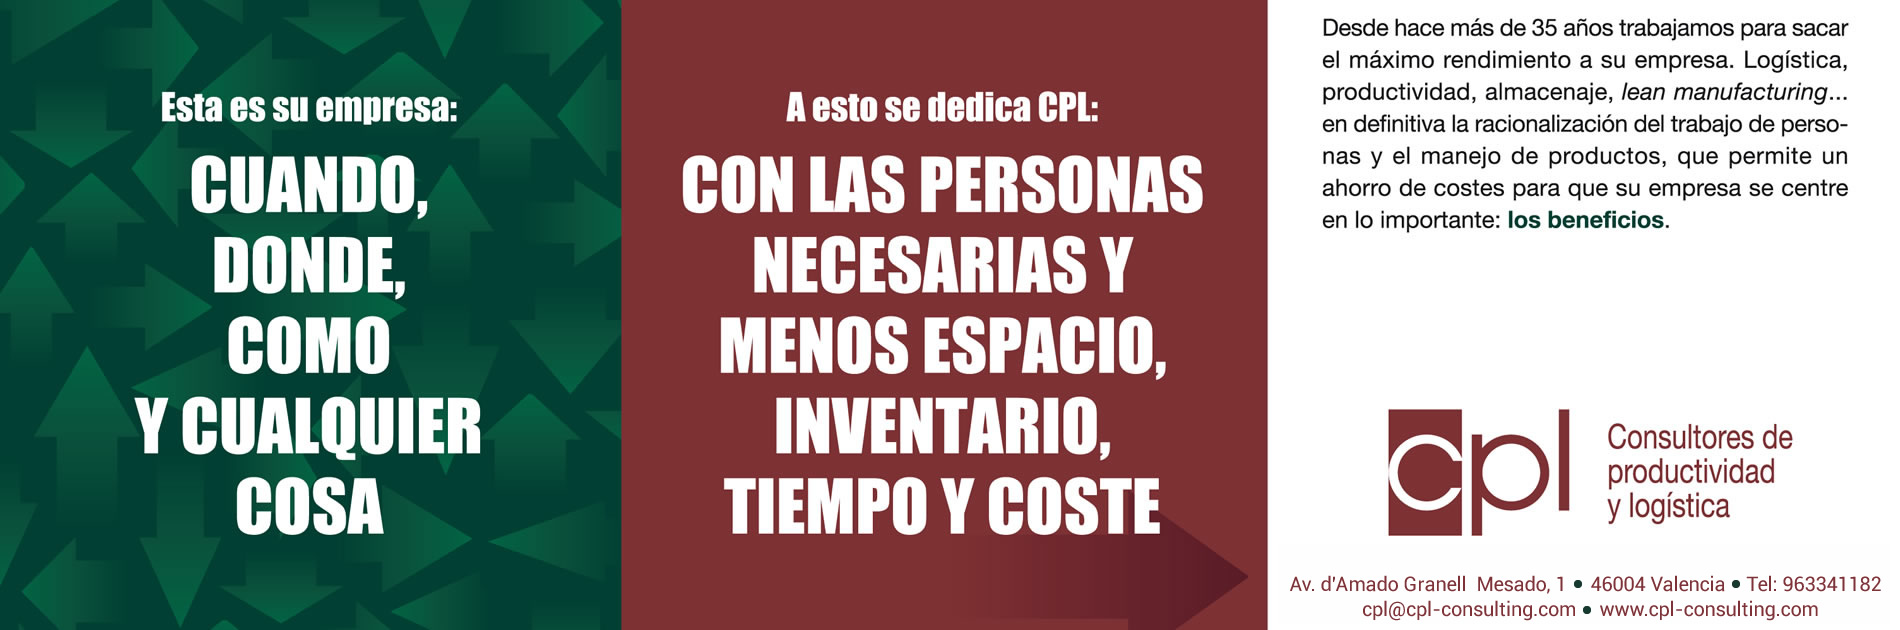 cpl consulting